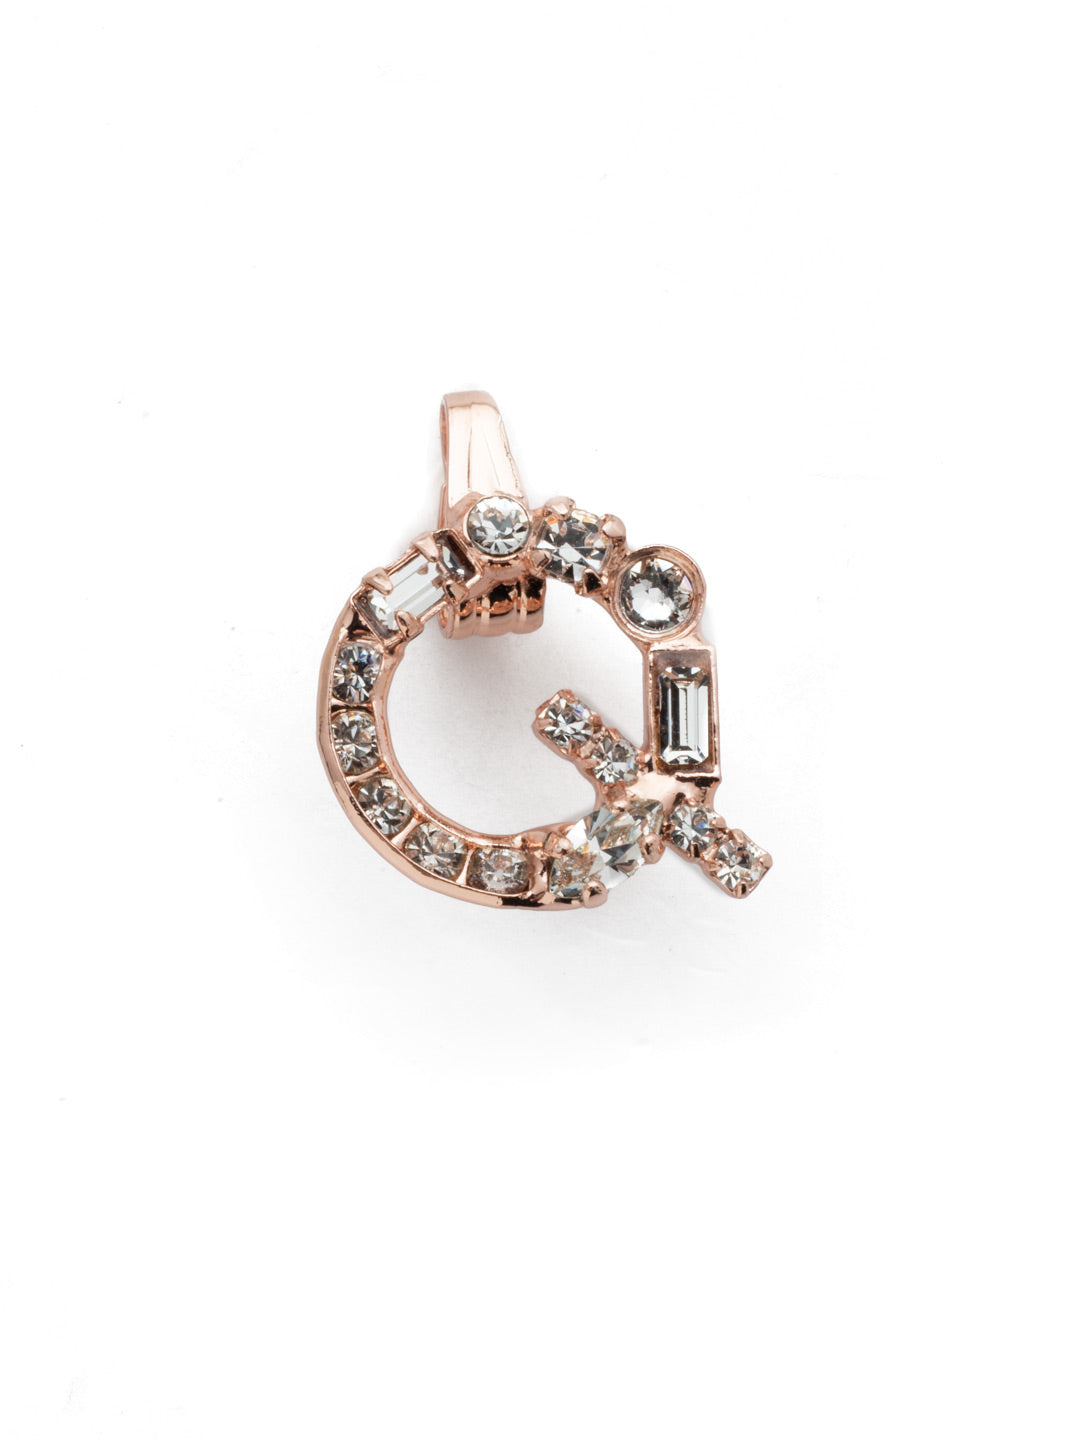 Crystal Charm 'Q' Charm Other Accessory - CES22RGCRY